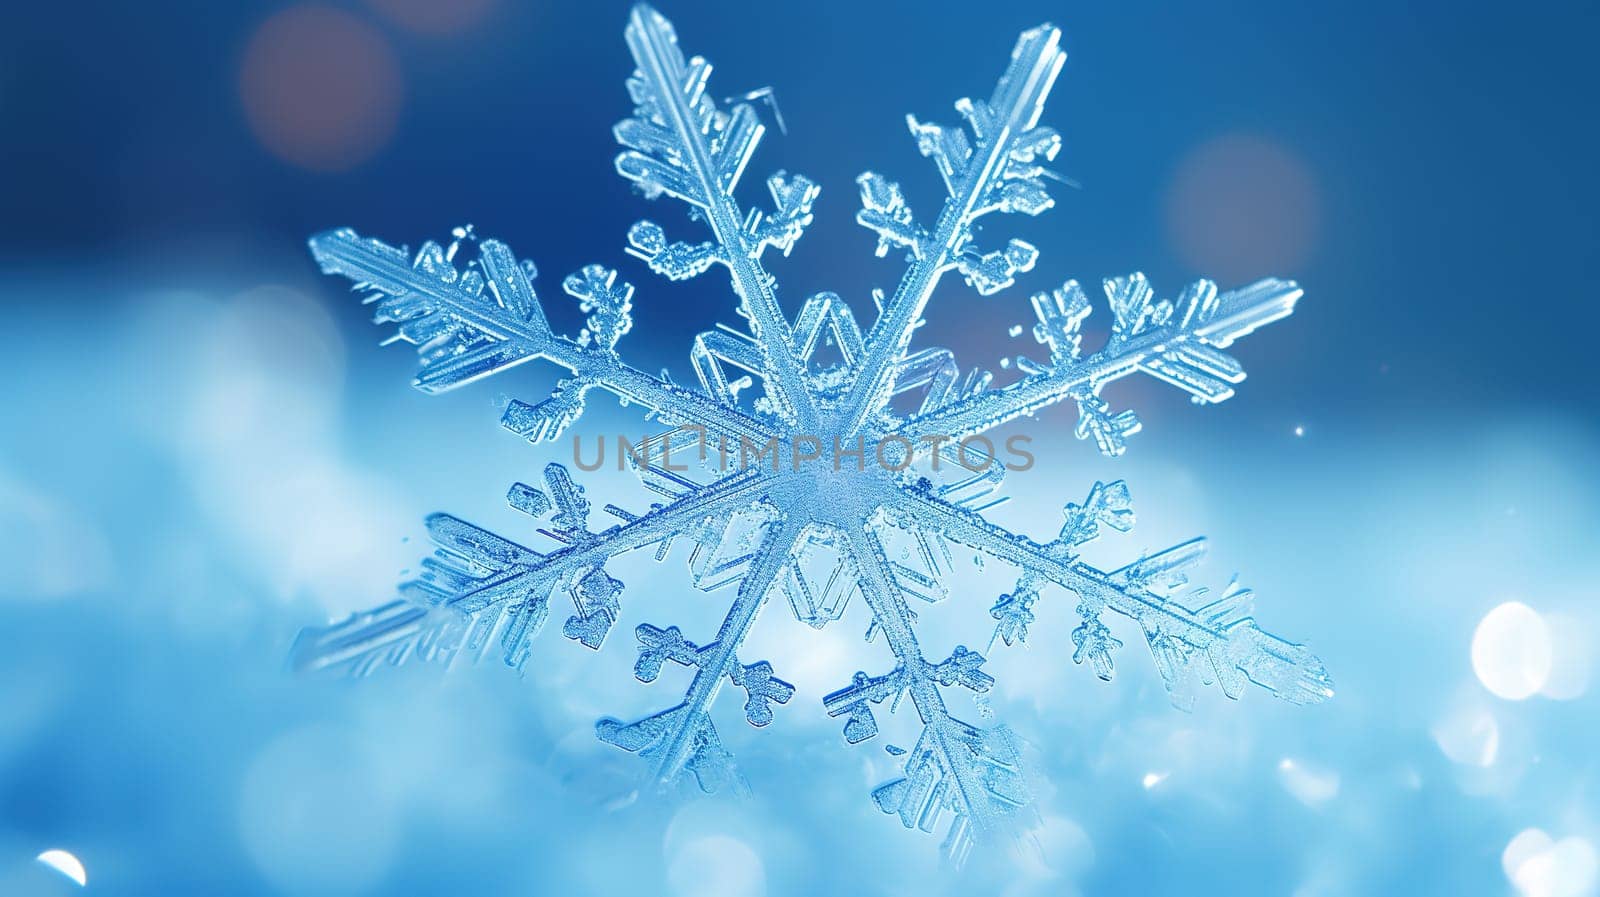 Macro detail to a snowflakes as a background or texture, winter, nature concept